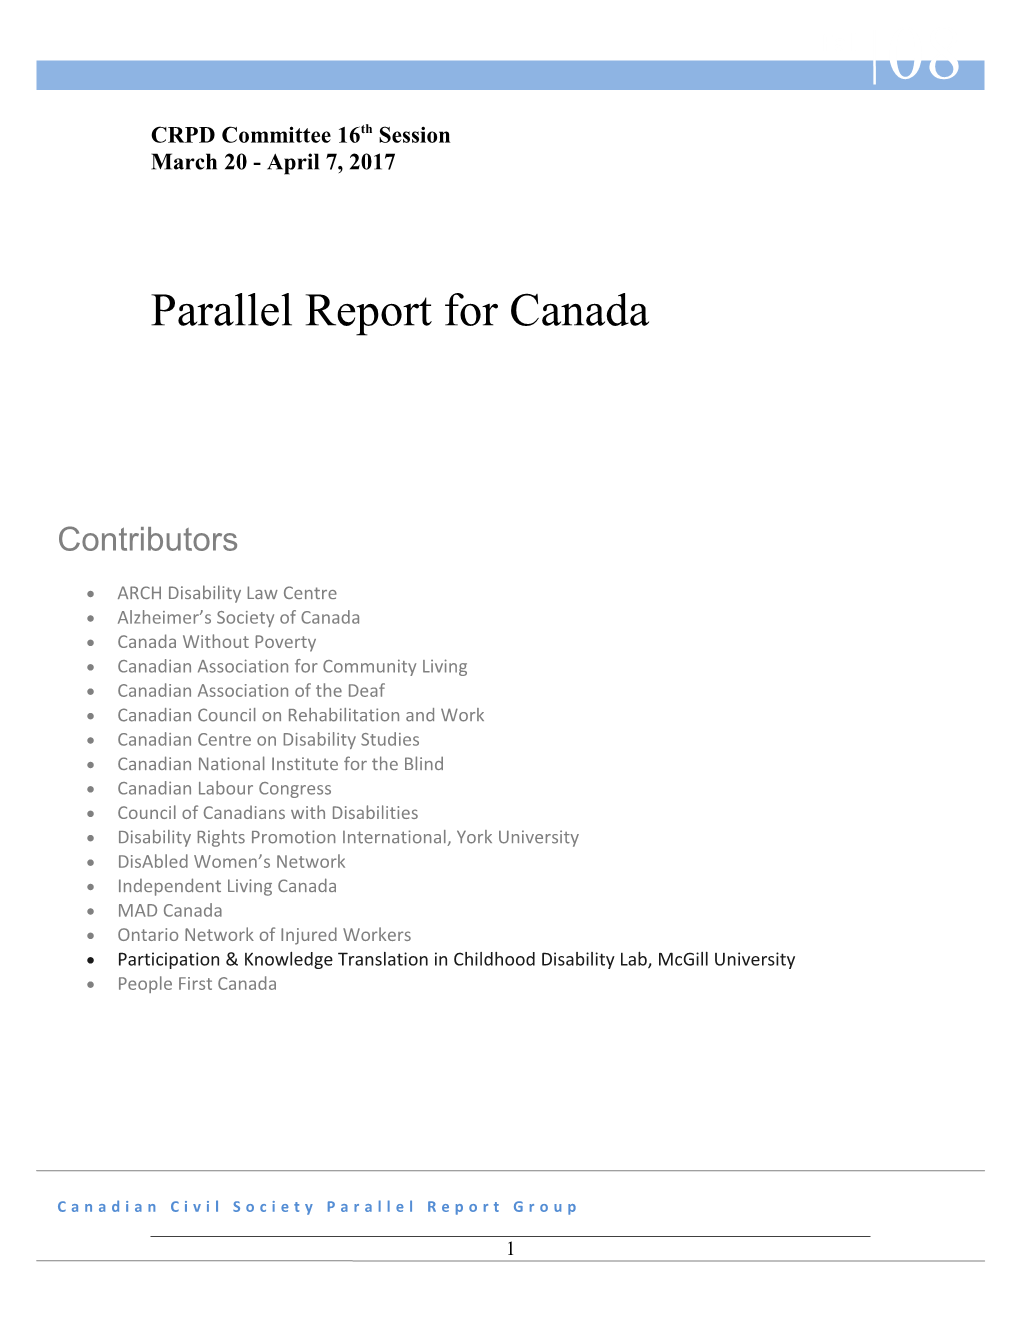 Canadian Civil Society Parallel Report Groupfebruary 27, 2017